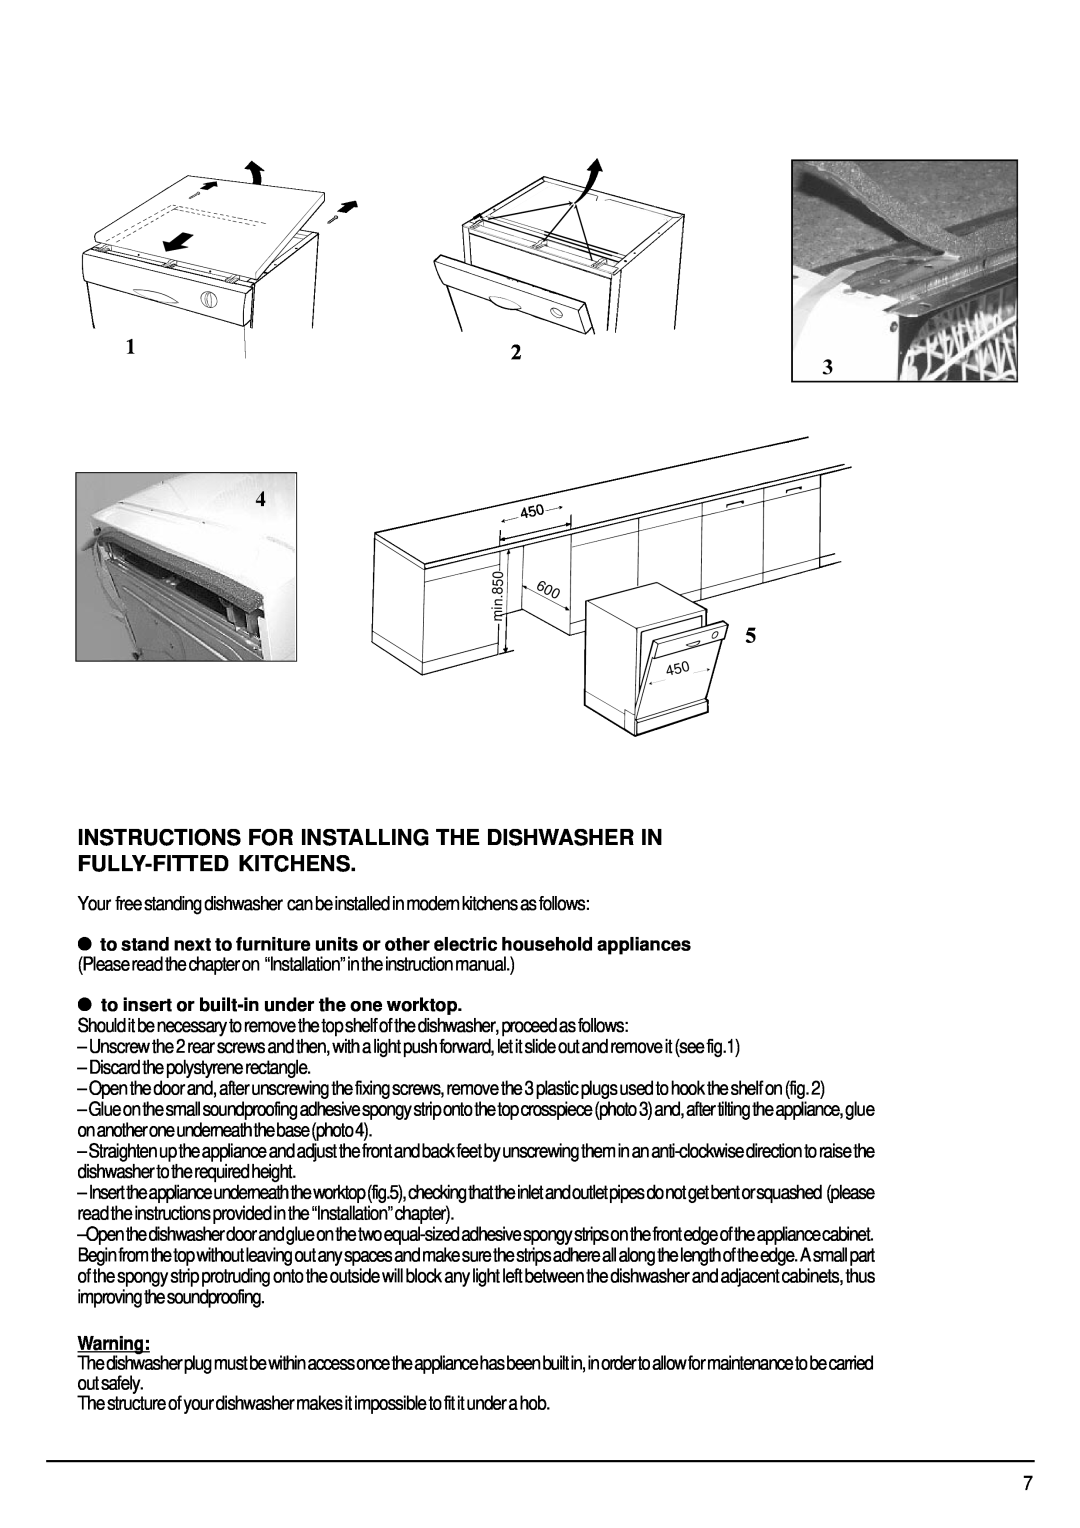 Hotpoint SDW85, SDW80 manual Instructions For Installing The Dishwasher In, Fully-Fittedkitchens 